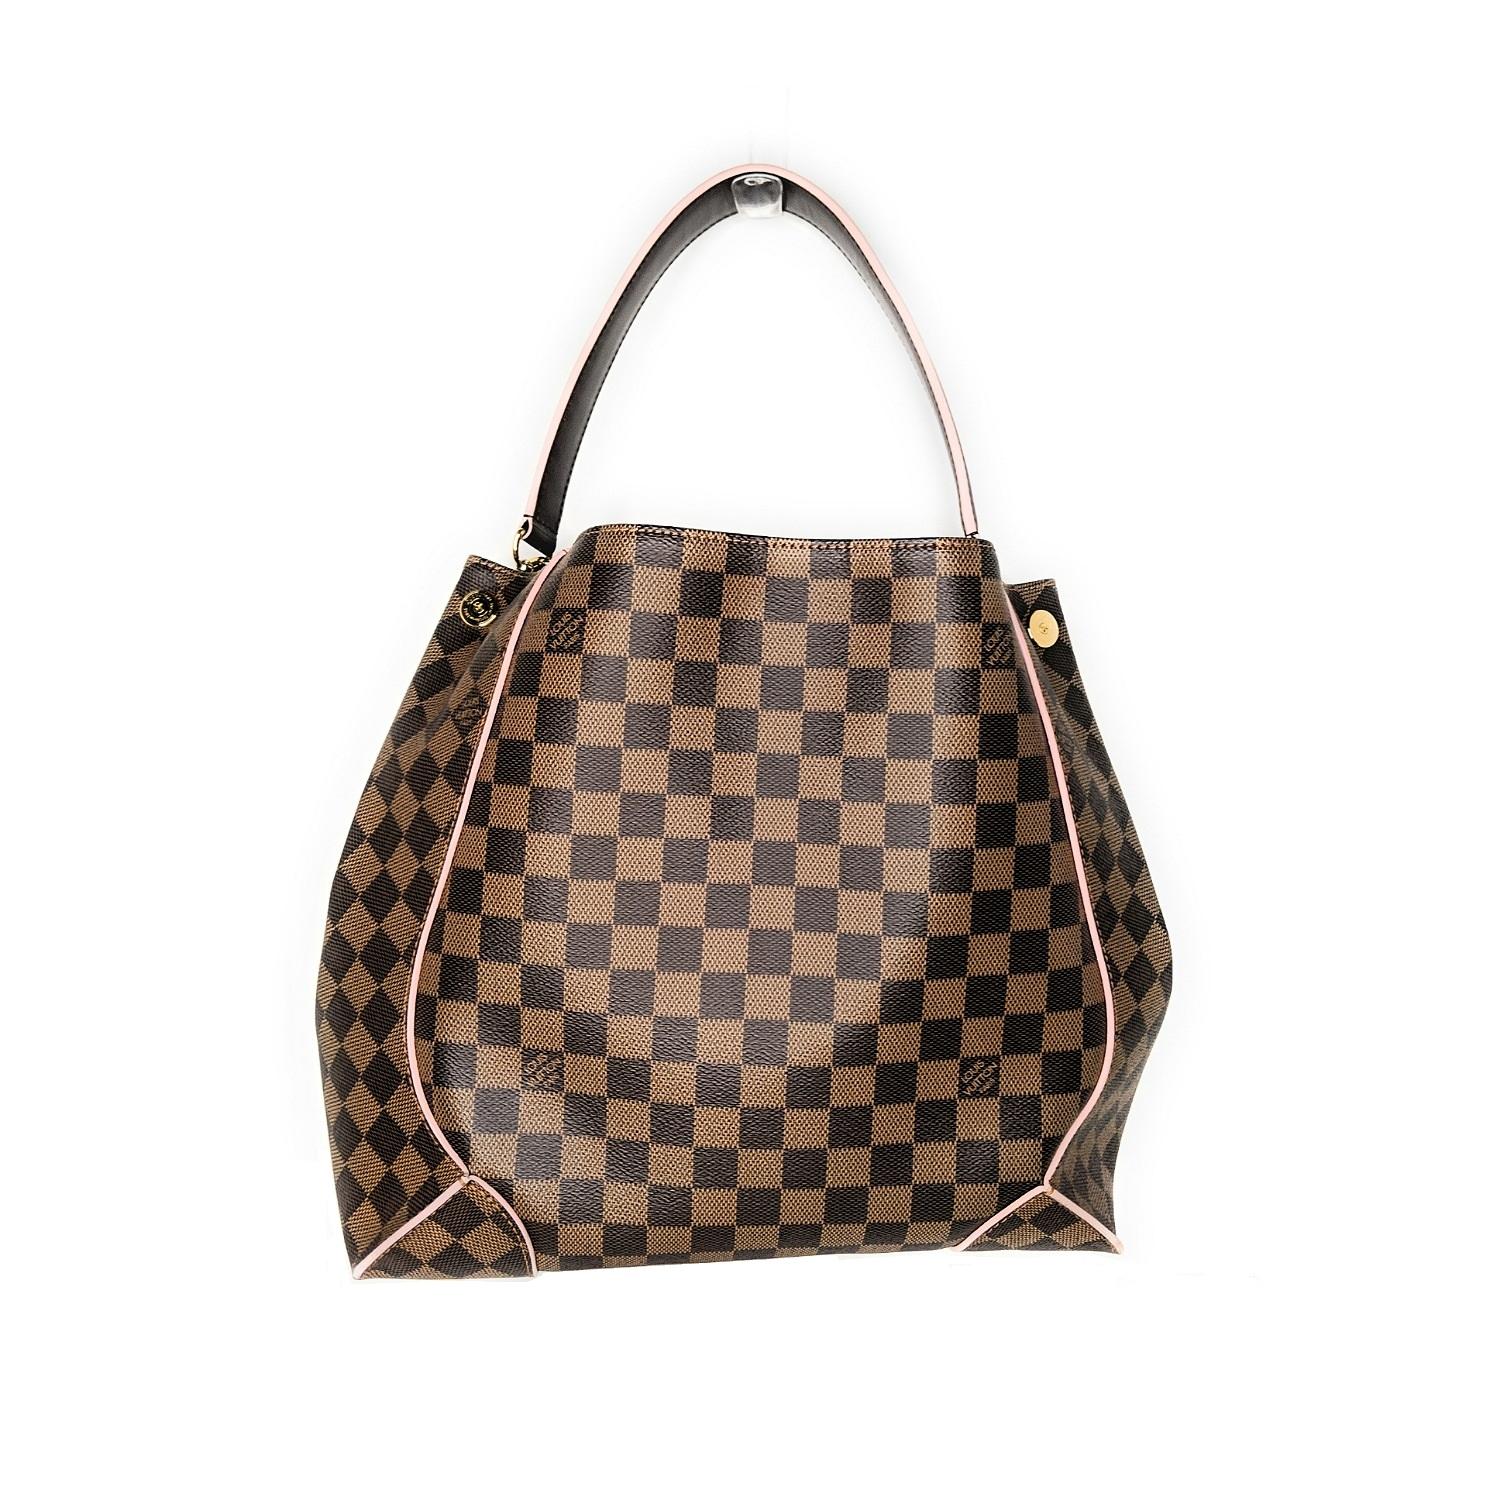 This chic hobo is finely crafted of classic Louis Vuitton damier checked coated canvas with pink leather trim. The shoulder bag features a brown leather looping shoulder strap with polished brass anchors. The top opens to a pink microfiber interior